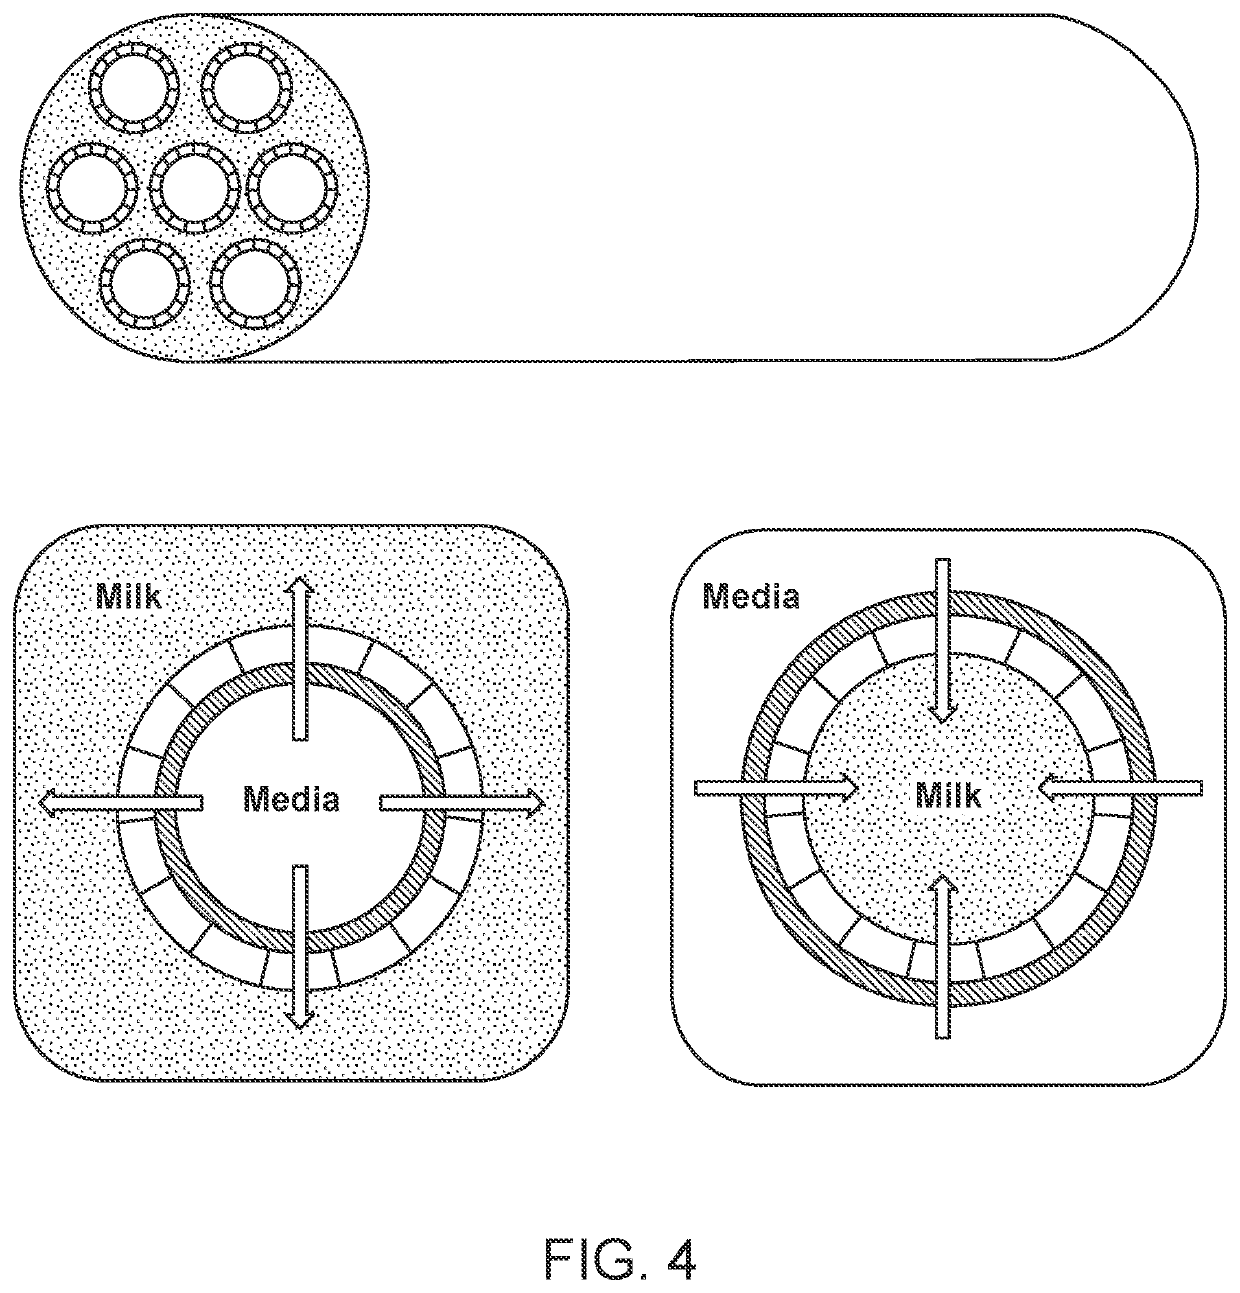 Live cell constructs for production of cultured milk product and methods using the same